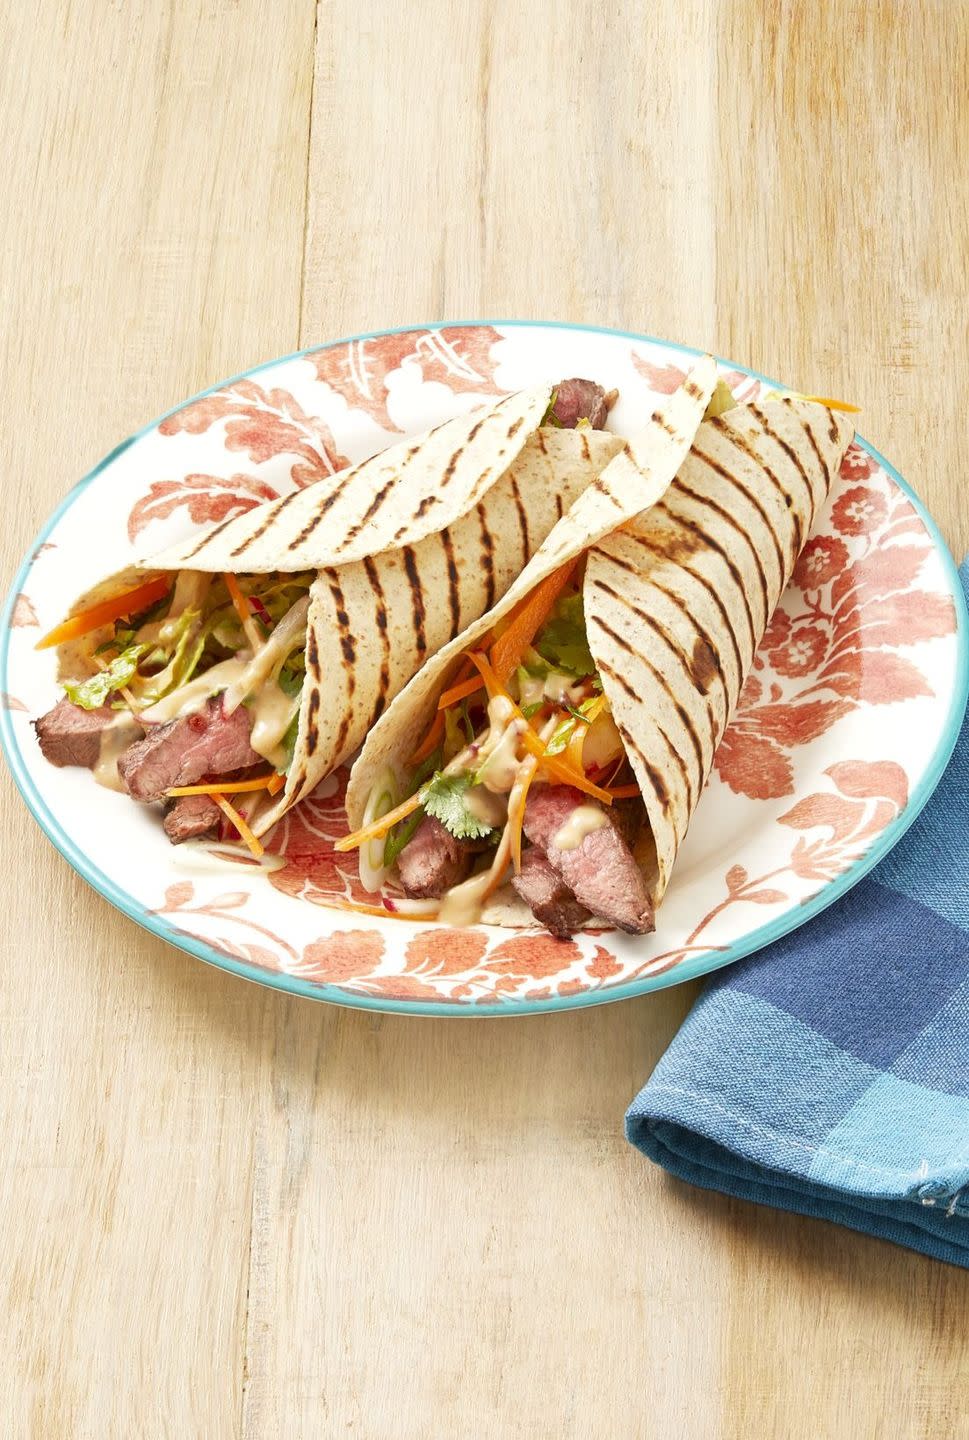 Grilled steak wrap with peanut sauce